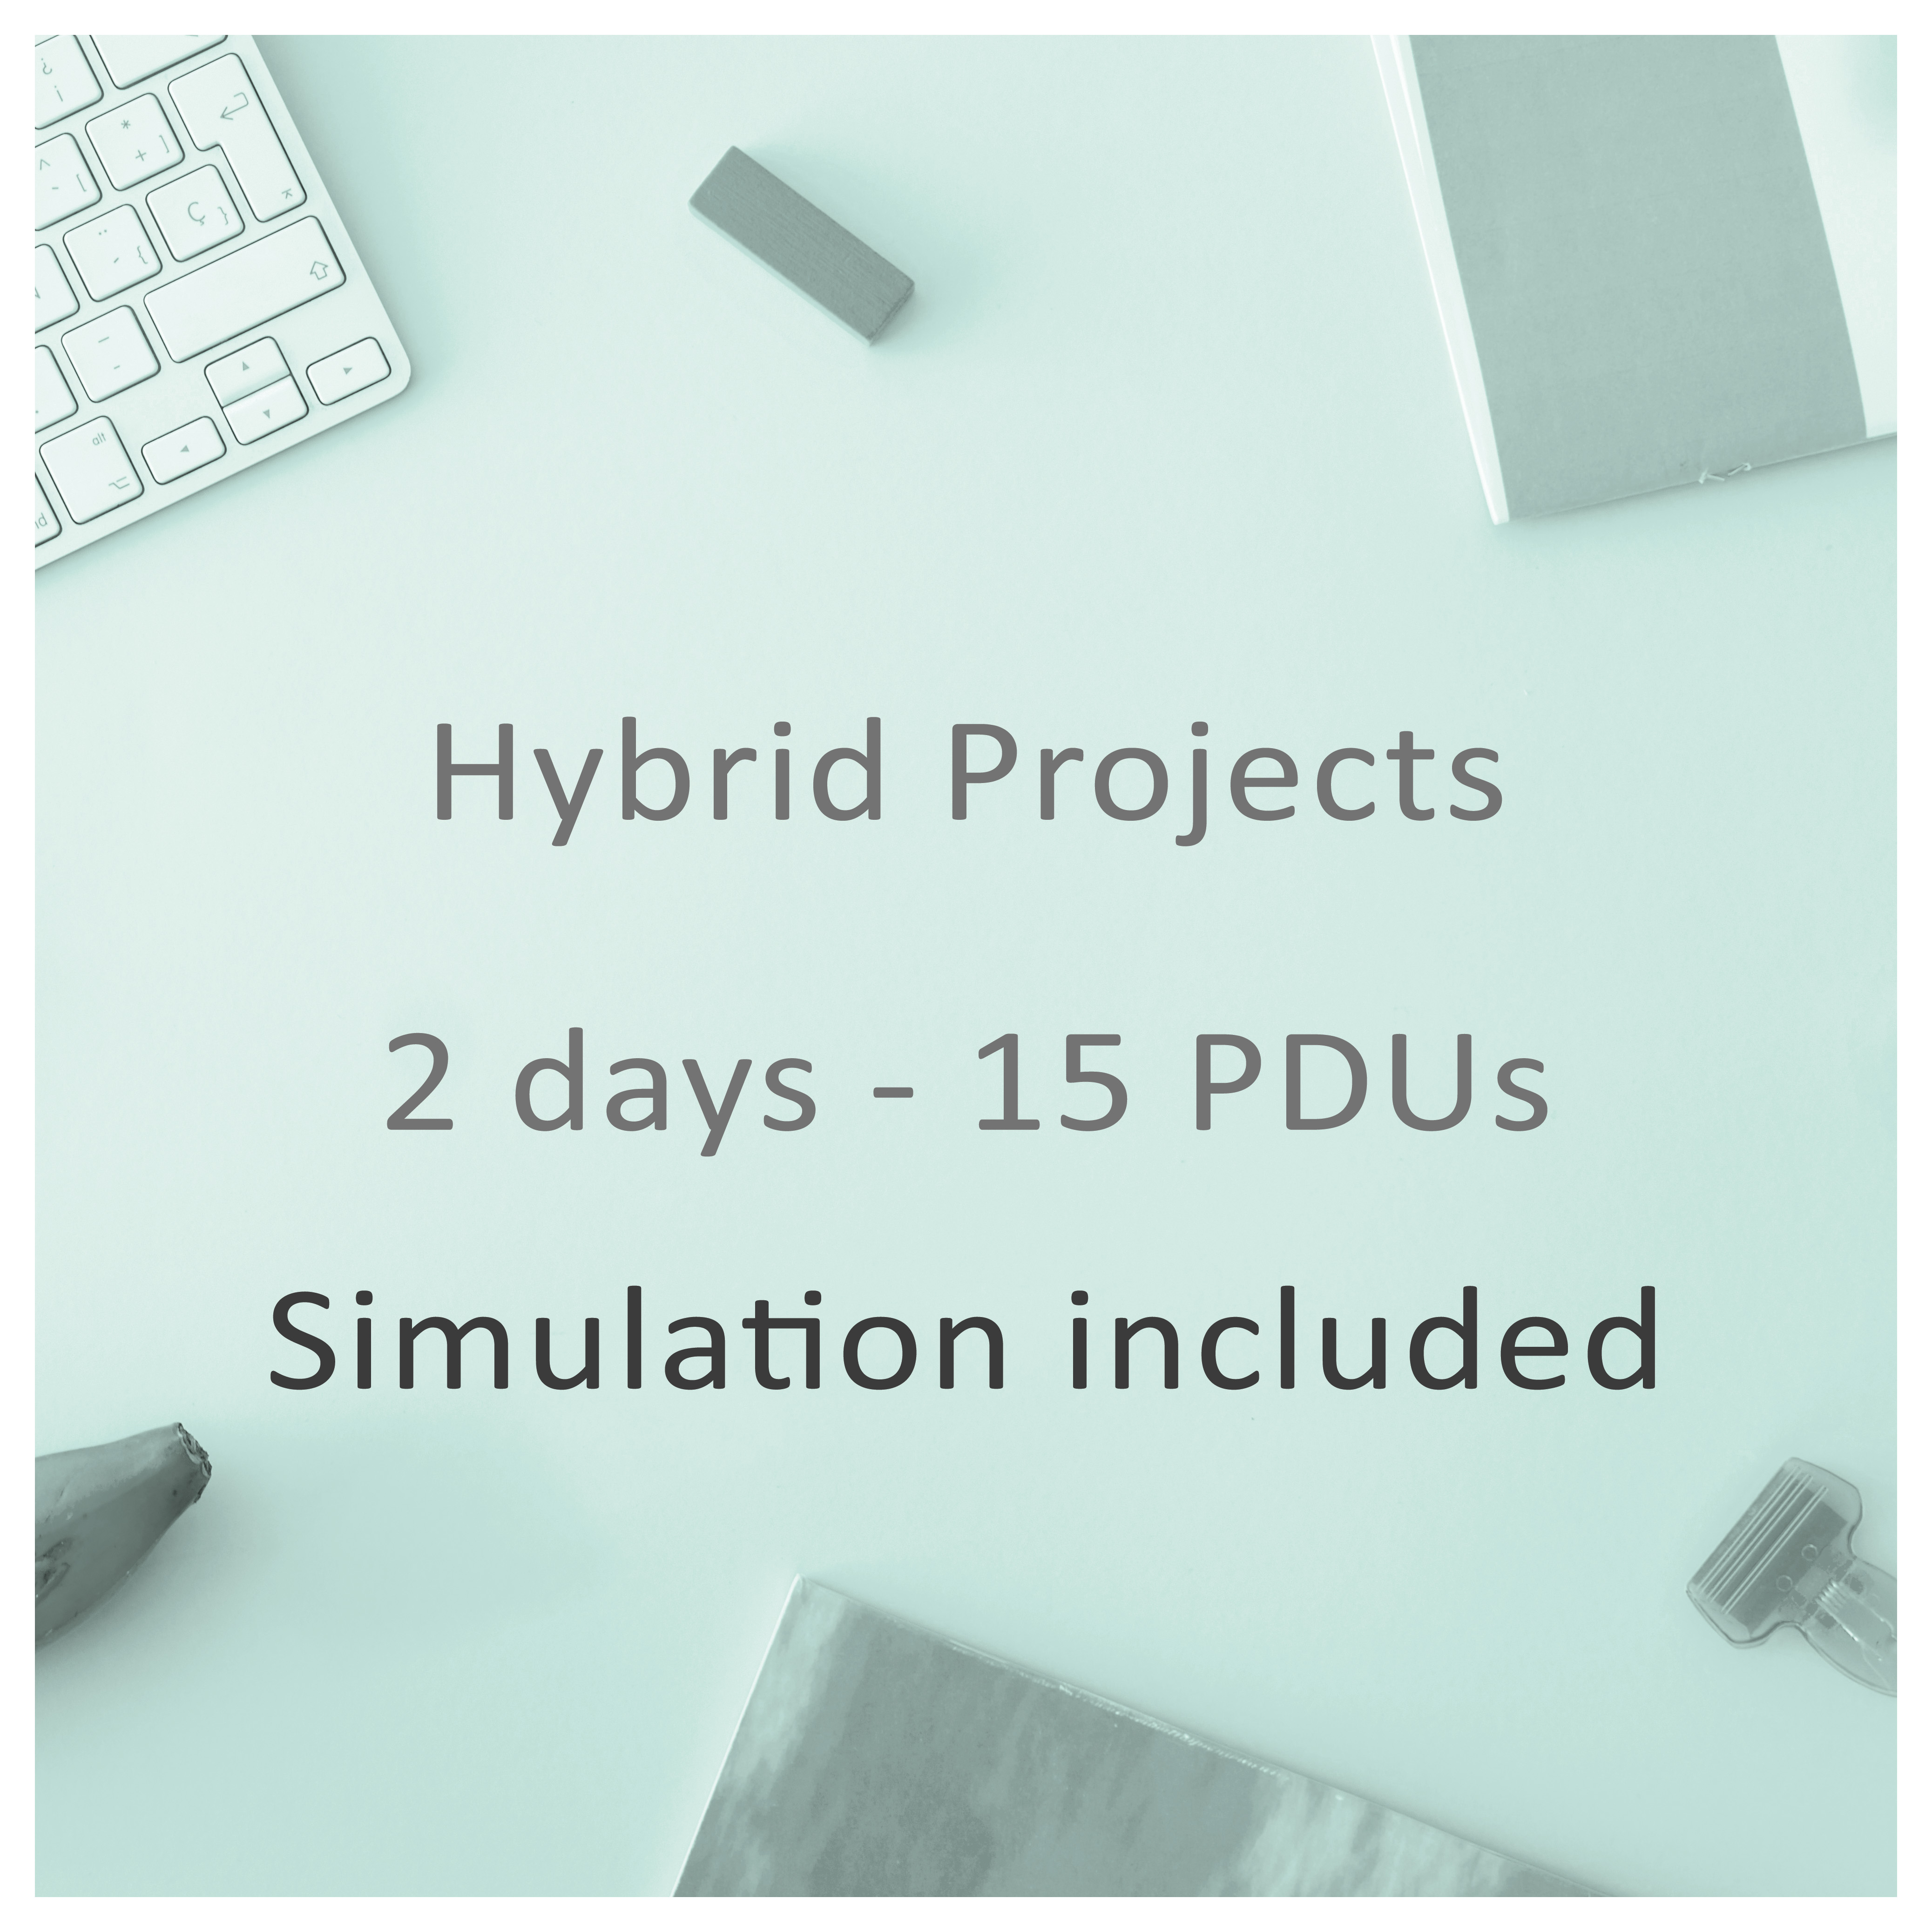 Hybrid Projects